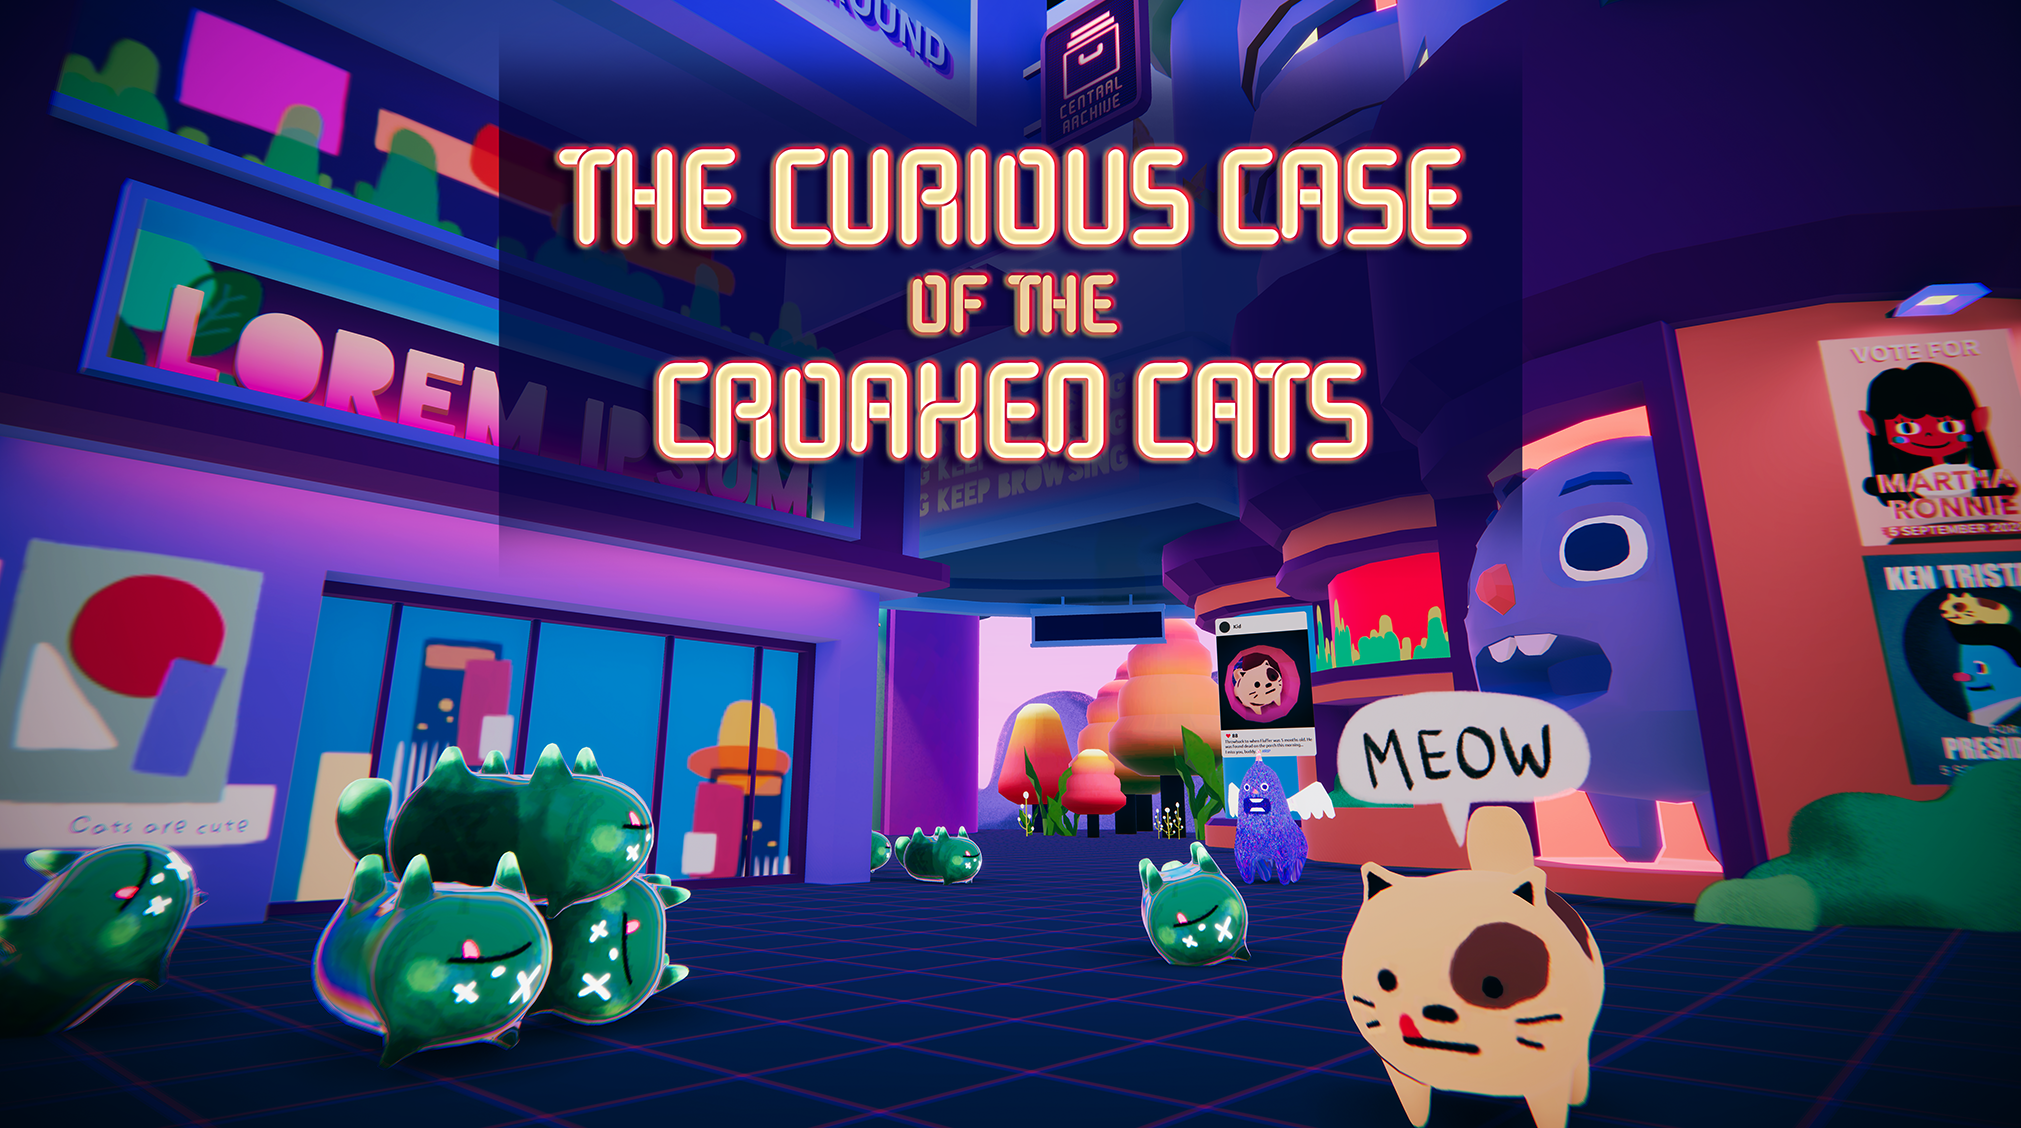 The Curious Case of the Croaked Cats